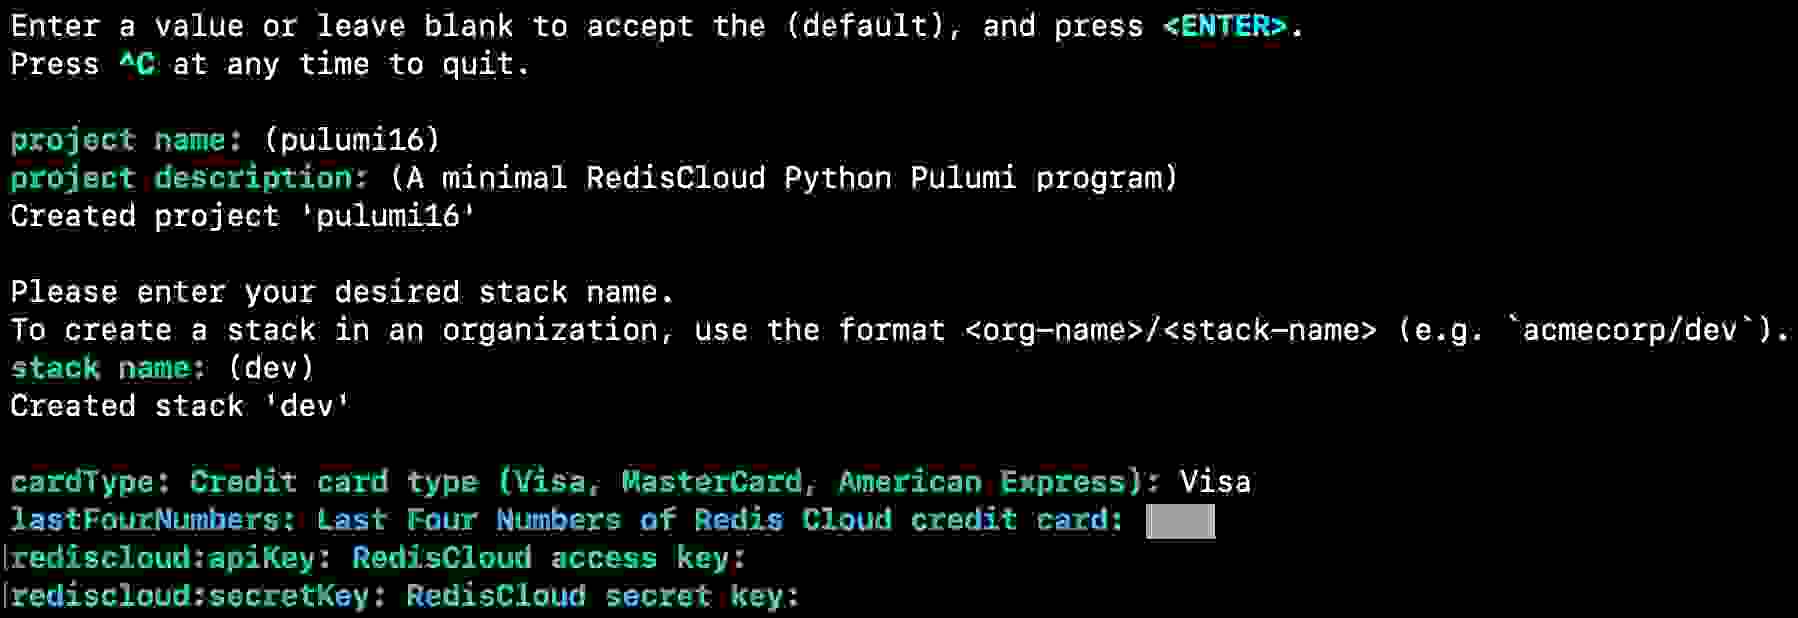 The Redis Cloud API secrets are now stored in an encrypted Pulumi service. If your payment method is Marketplace, just edit the payment_method attribute in the code below.